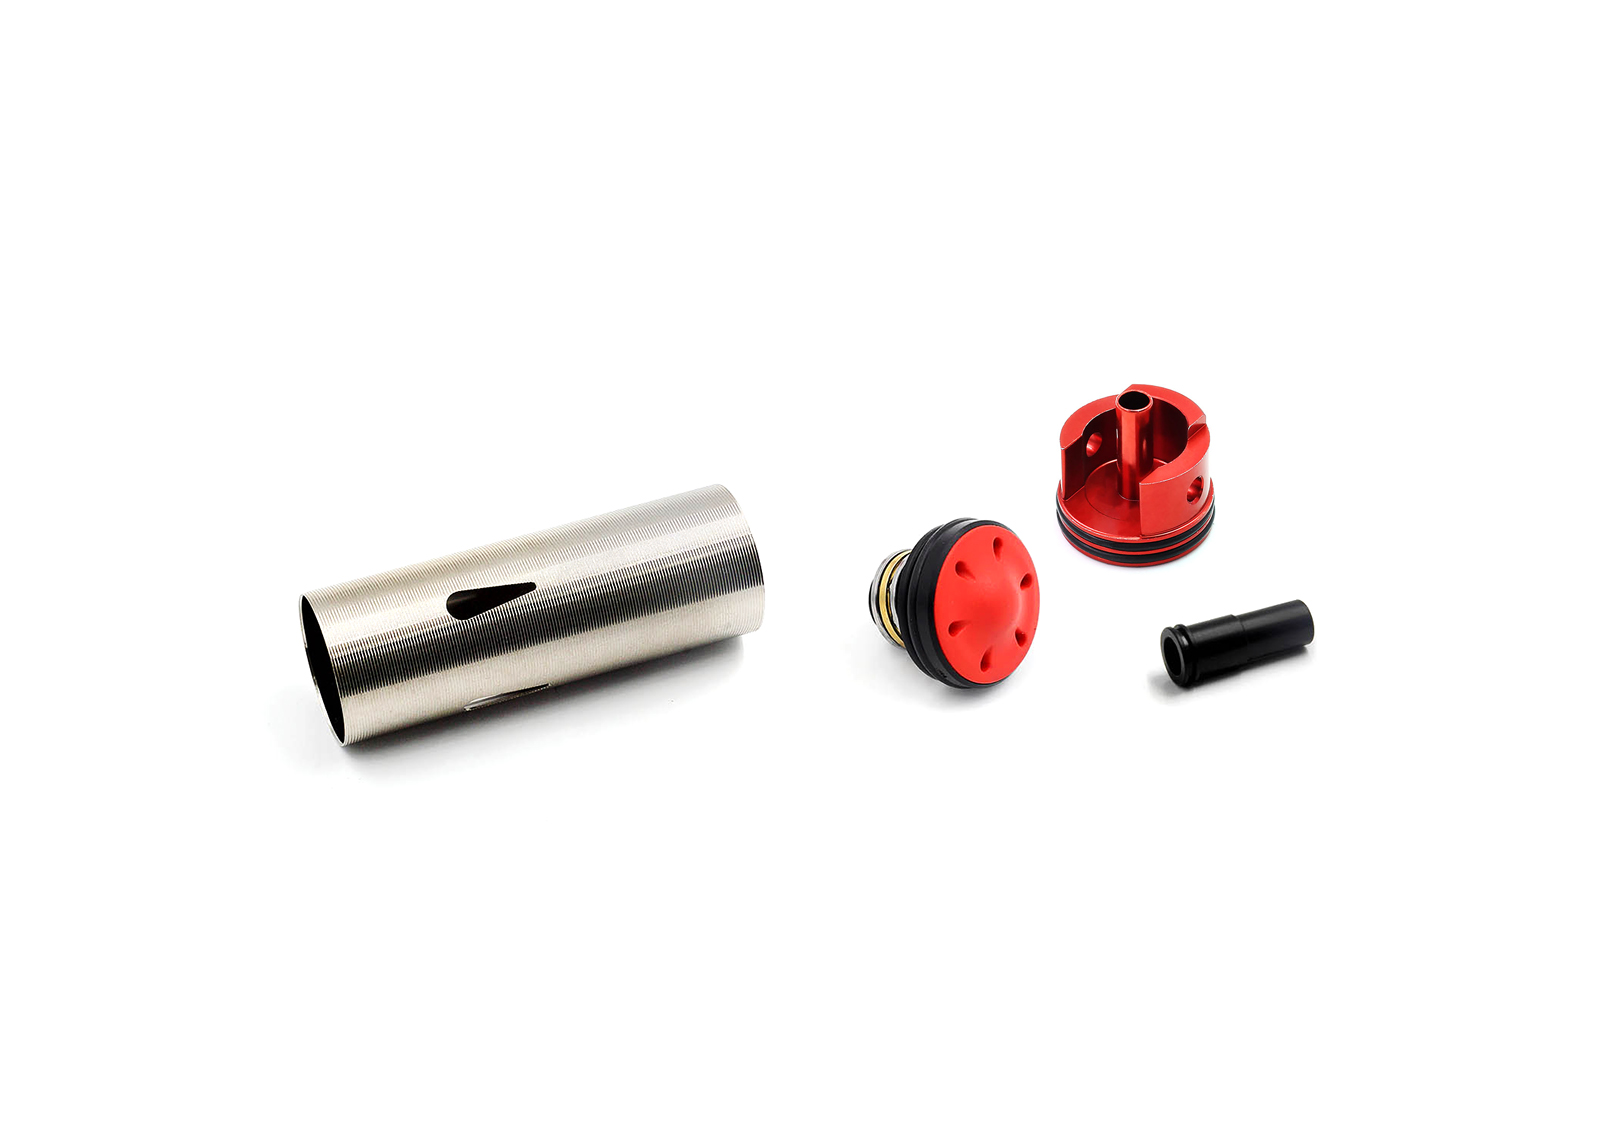 Bore-Up Cylinder Set for SIG552 - Modify AEG Airsoft parts